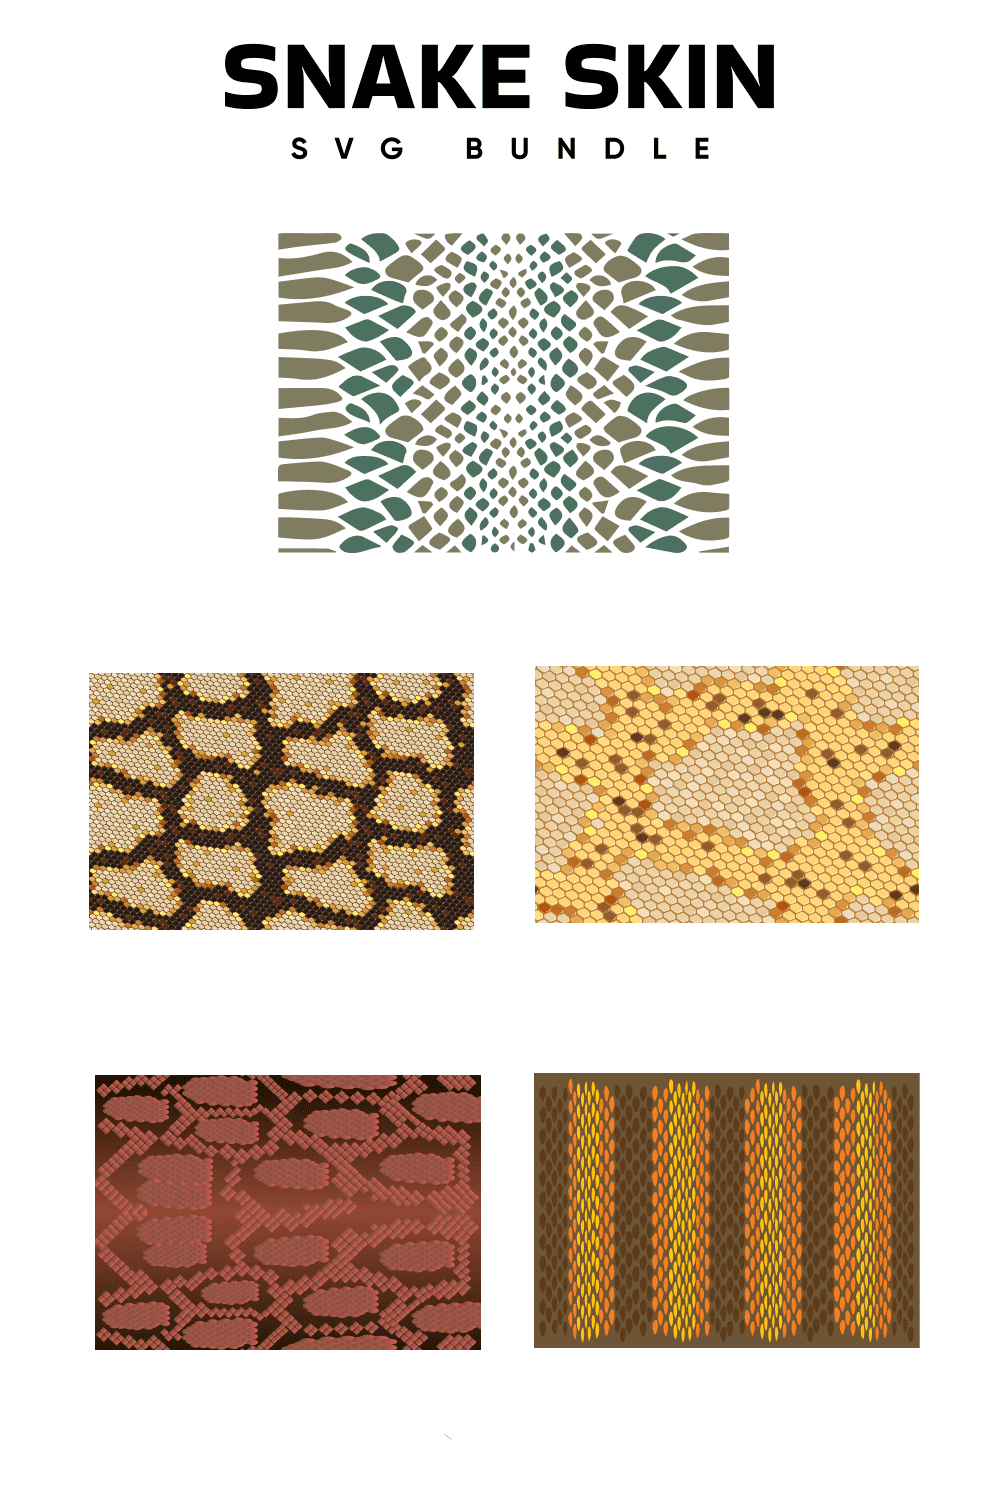 Snake skin swatches are shown in four different colors.